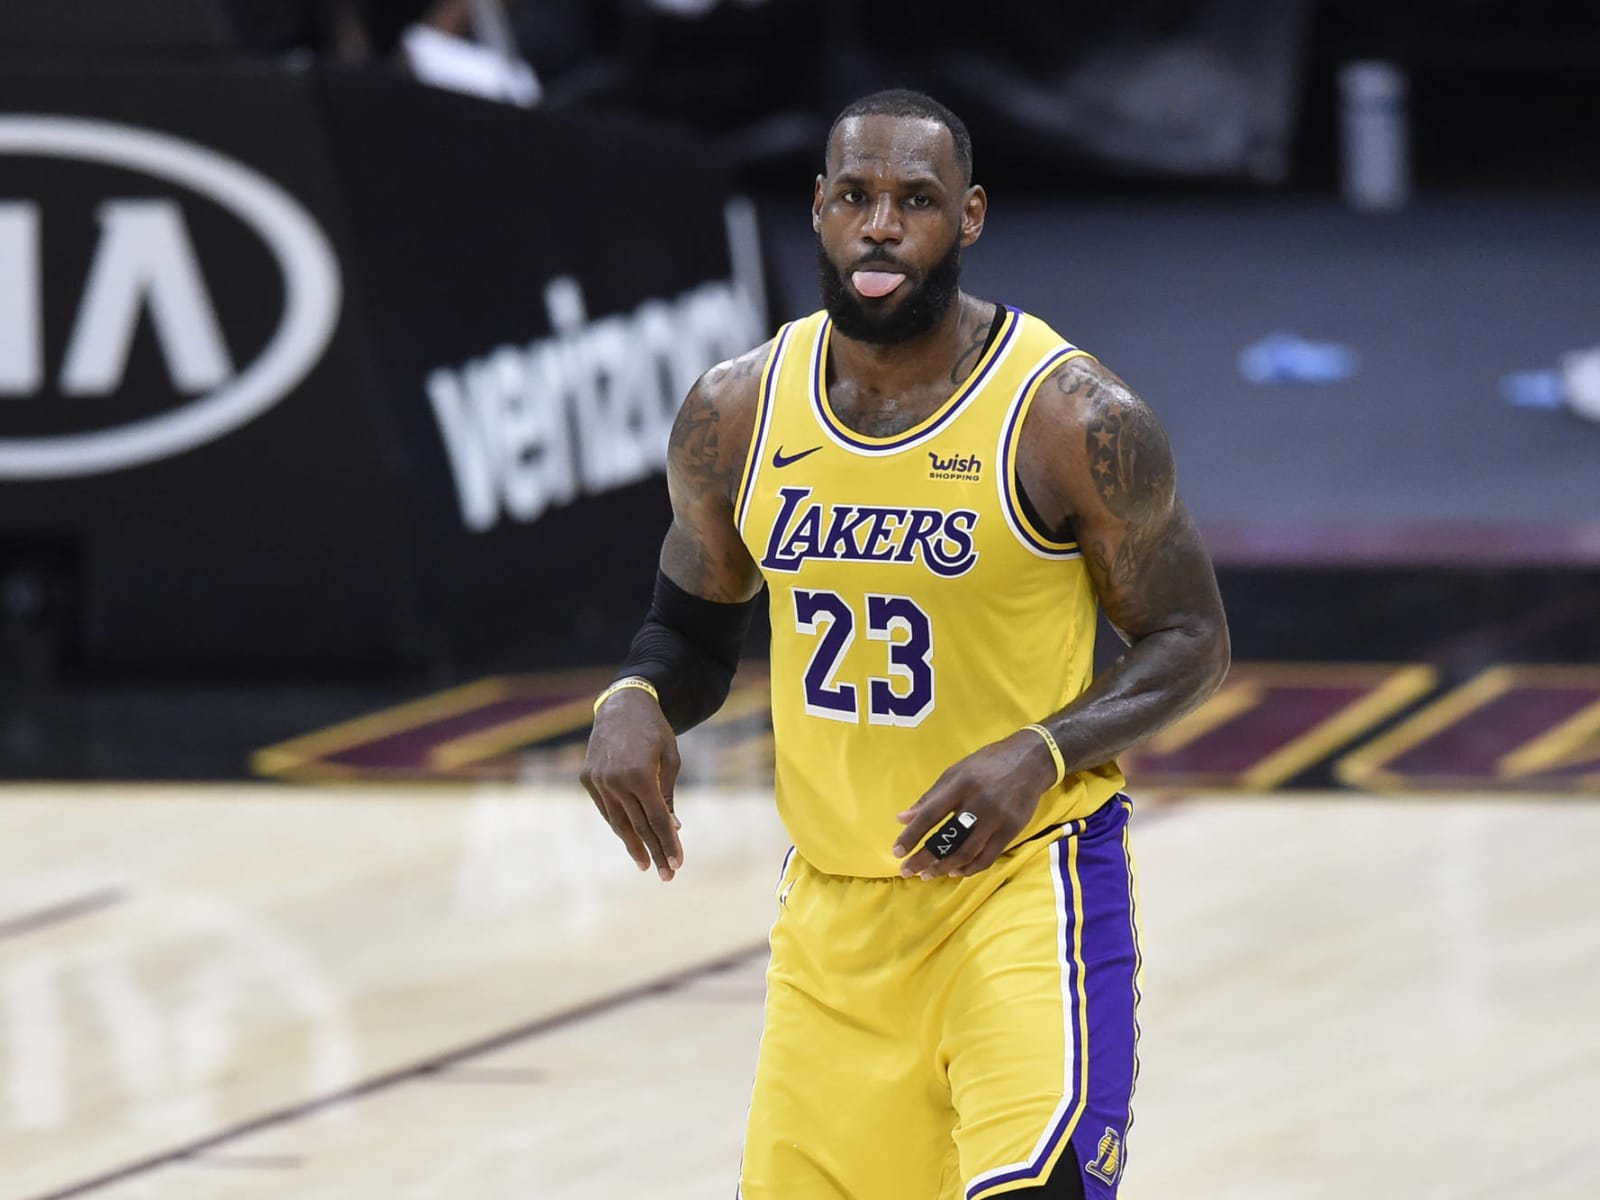 SportsCenter - No. 6 back‼️ LeBron James plans to change his Los Angeles  Lakers jersey number to No. 6 next season, first reported by The Athletic  and confirmed by ESPN.